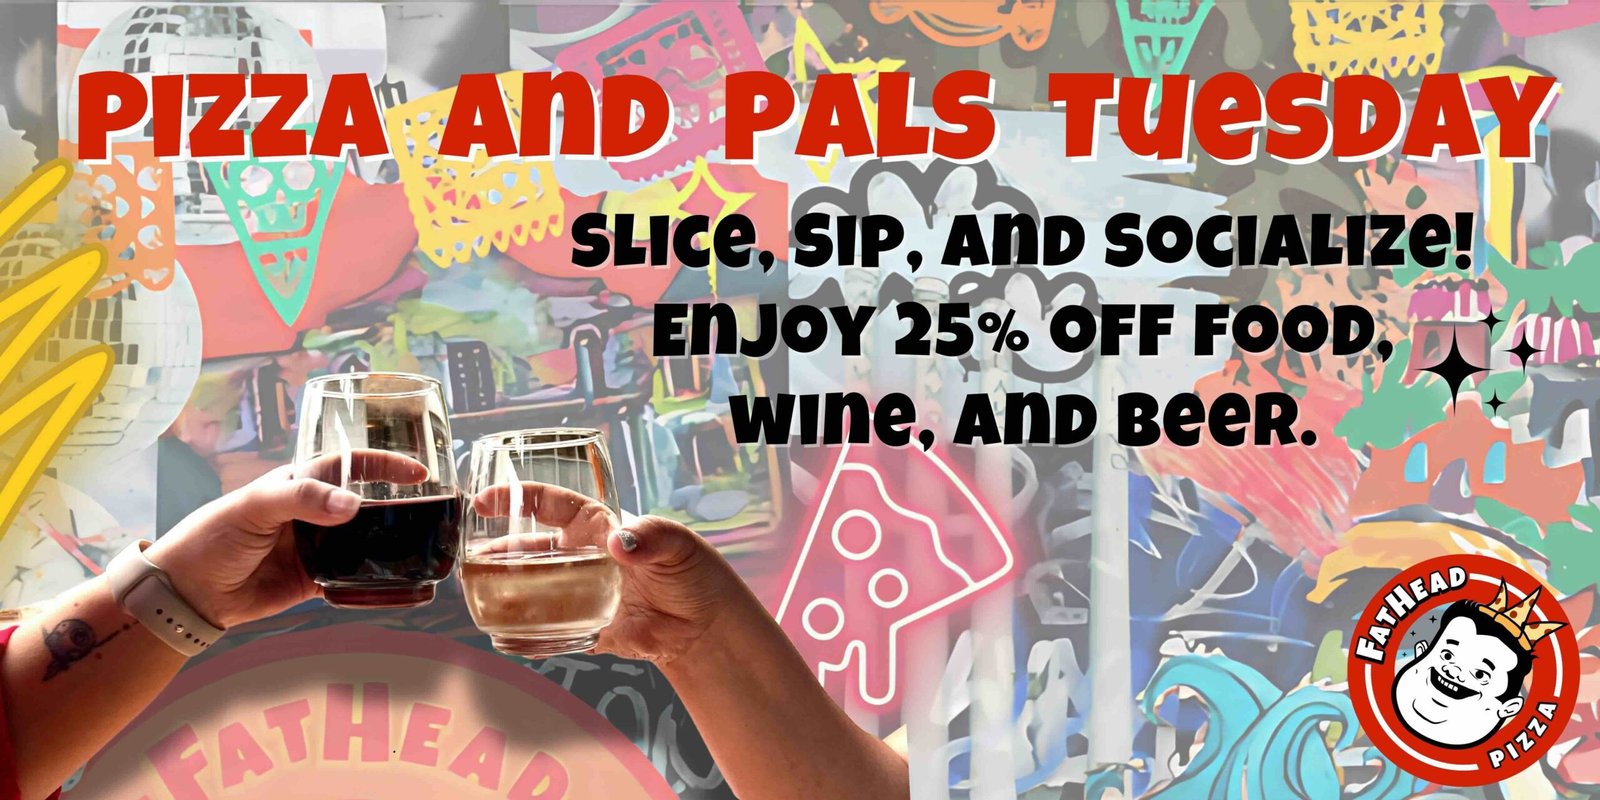 Promo Web Banners - Pizza and Pals Tuesday